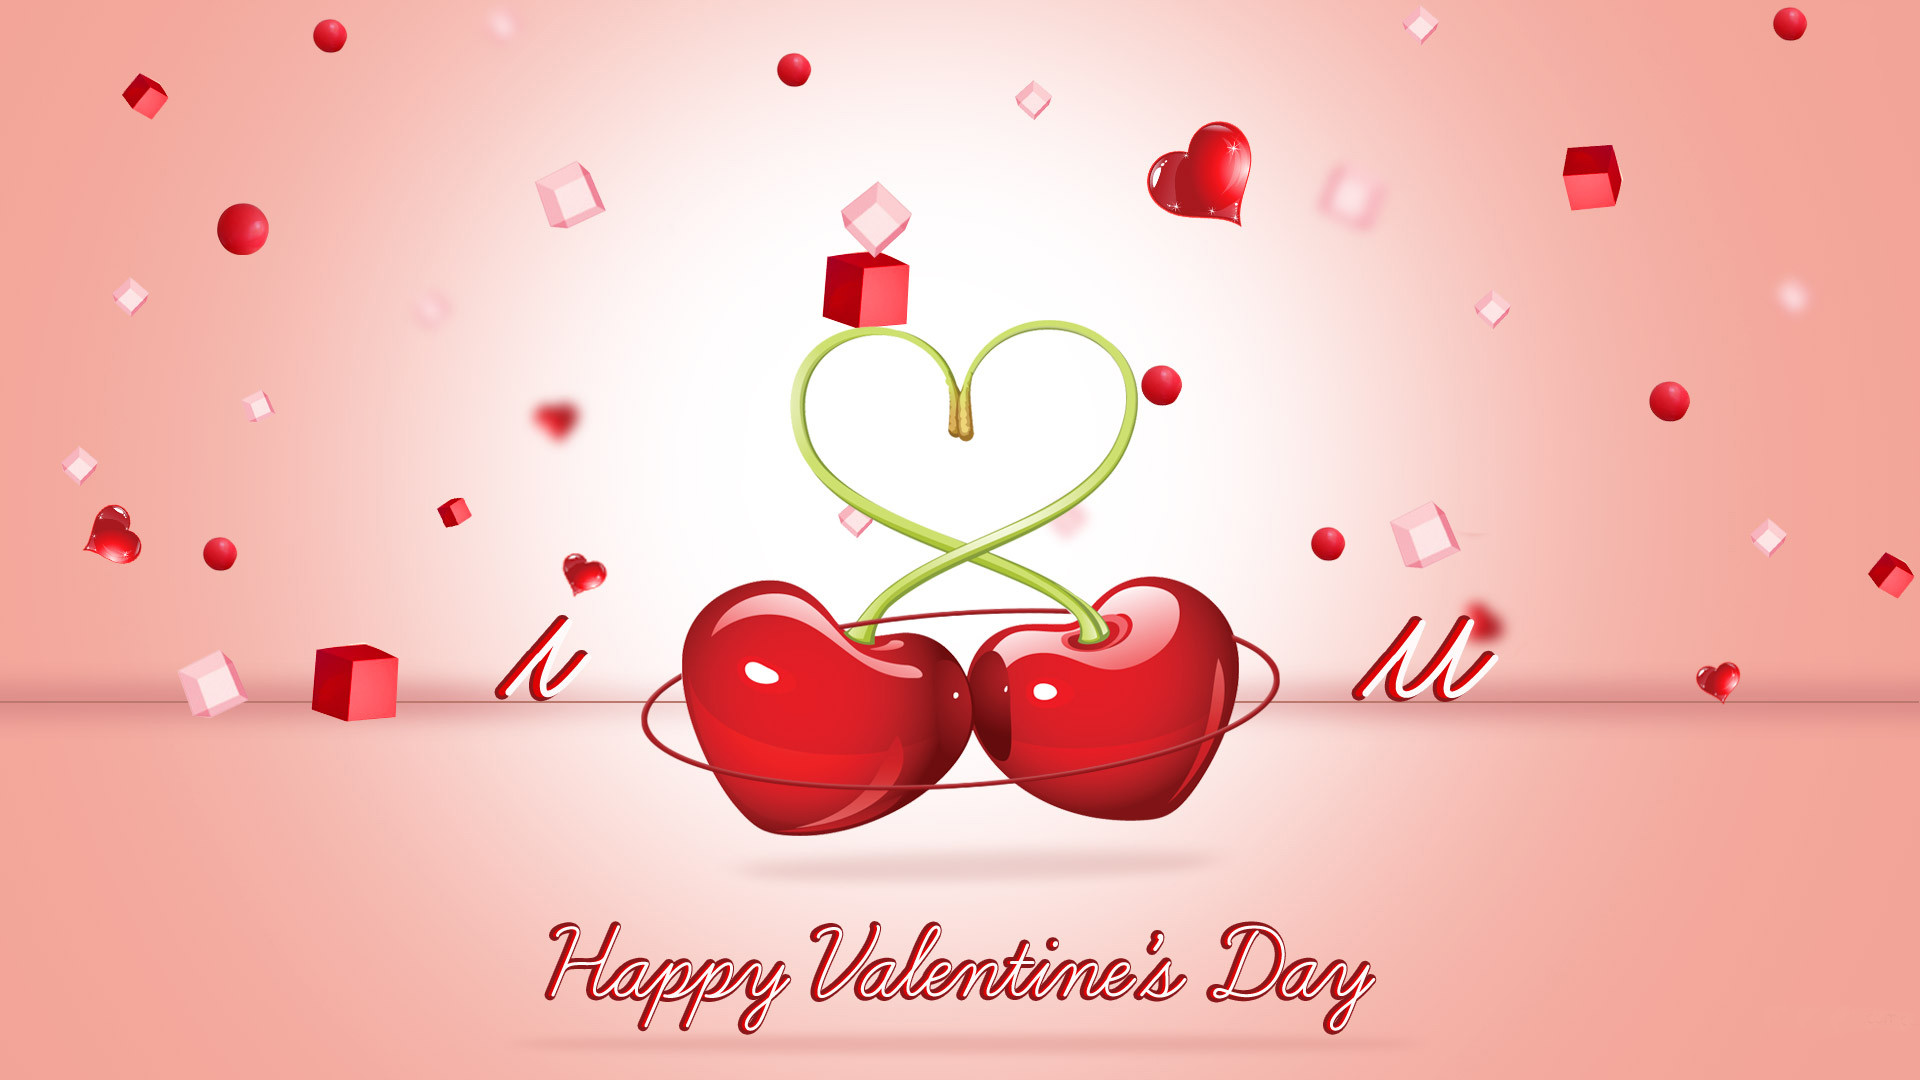 Full Screen Hd Valentines Day Wishes Whatsapp Dp Download